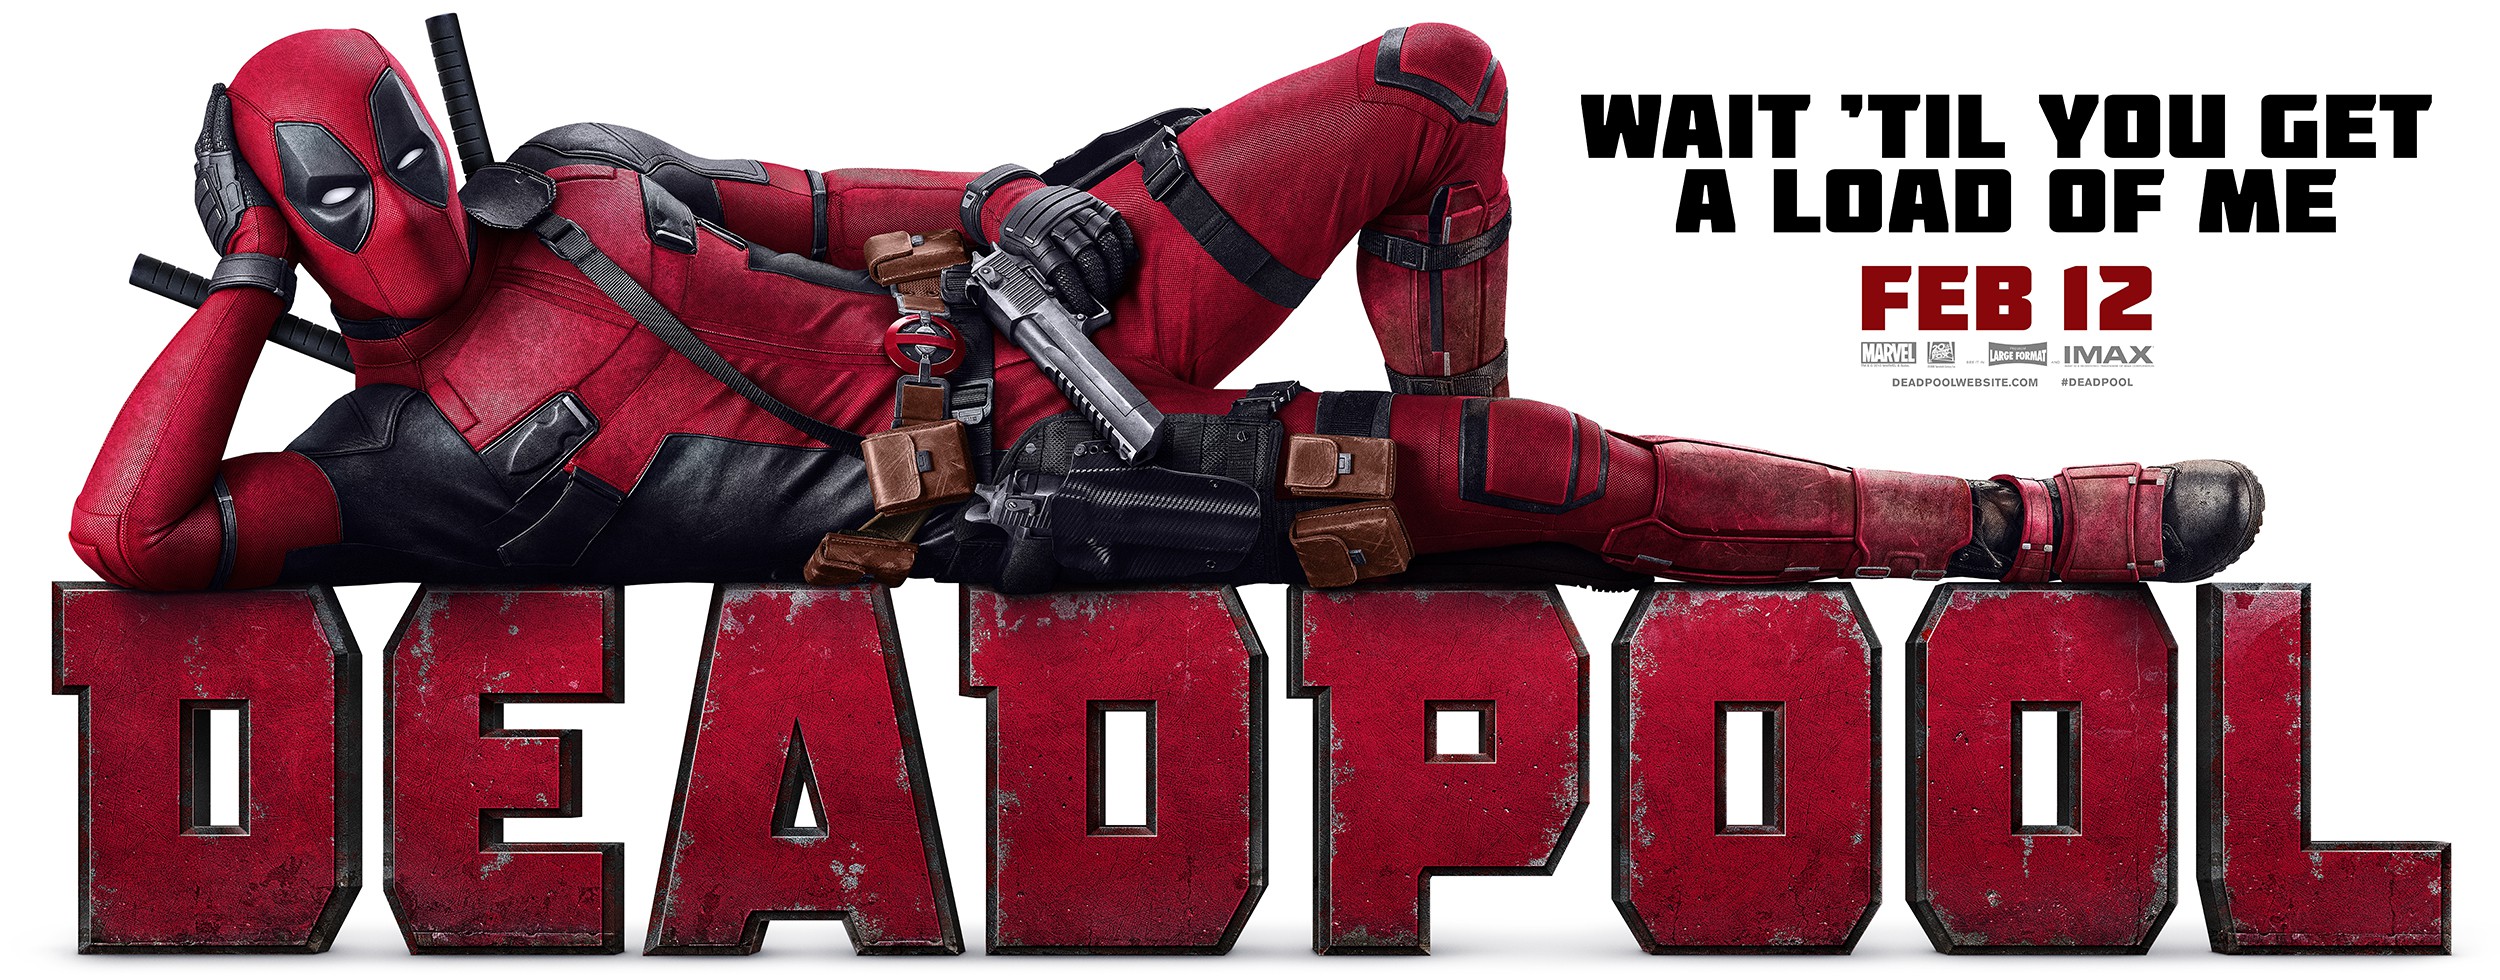 Mega Sized Movie Poster Image for Deadpool (#11 of 15)